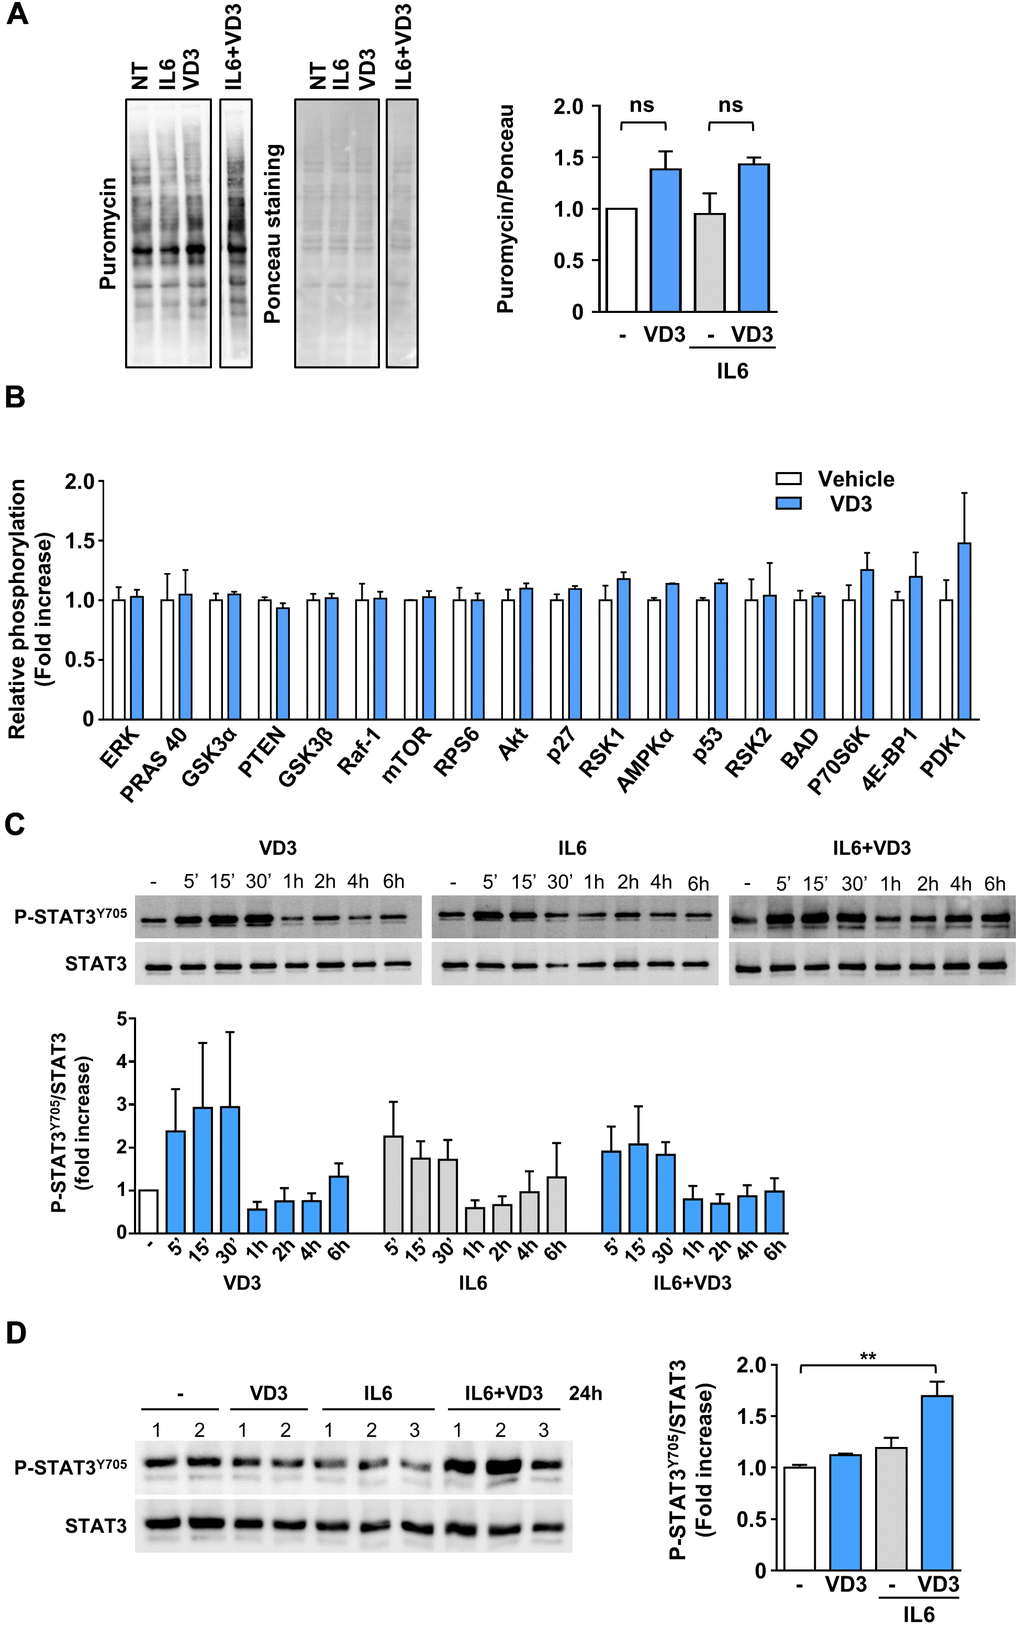 VD3 does not stimulate protein synthesis but activates STAT3. (A) Protein synthesis upon 24 h of treatment with 20 ng/ml IL6 in the presence or absence of 100nM VD3 was evaluated by SUnSET assay. Incorporation of puromycin into newly synthesized proteins was visualized by Western blotting and normalized on total proteins detected by Ponceau staining (representative images on the left of the panel). Densitometry of three experiments is shown on the right part of the panel. (B) Relative phosphorylation of proteins of Akt pathway after 30 min treatment with 100 nM VD3 through protein array analysis. (C) Representative western blot (top) and densitometry (bottom) of phosphorylated STAT3Y705 levels in C2C12 myotubes treated with 100 nM VD3, 20ng/mL IL6, or their combination for the indicated times. (D) Western blot (left) and densitometry (right) of phosphorylated STAT3Y705 levels in C2C12 myotubes treated with VD3, IL6, or their combination for 24 h. Data are presented as the mean ± SEM of three independent experiments except for (D), in which data are presented as the mean ± SD of the independent experiments indicated on the blot. **P